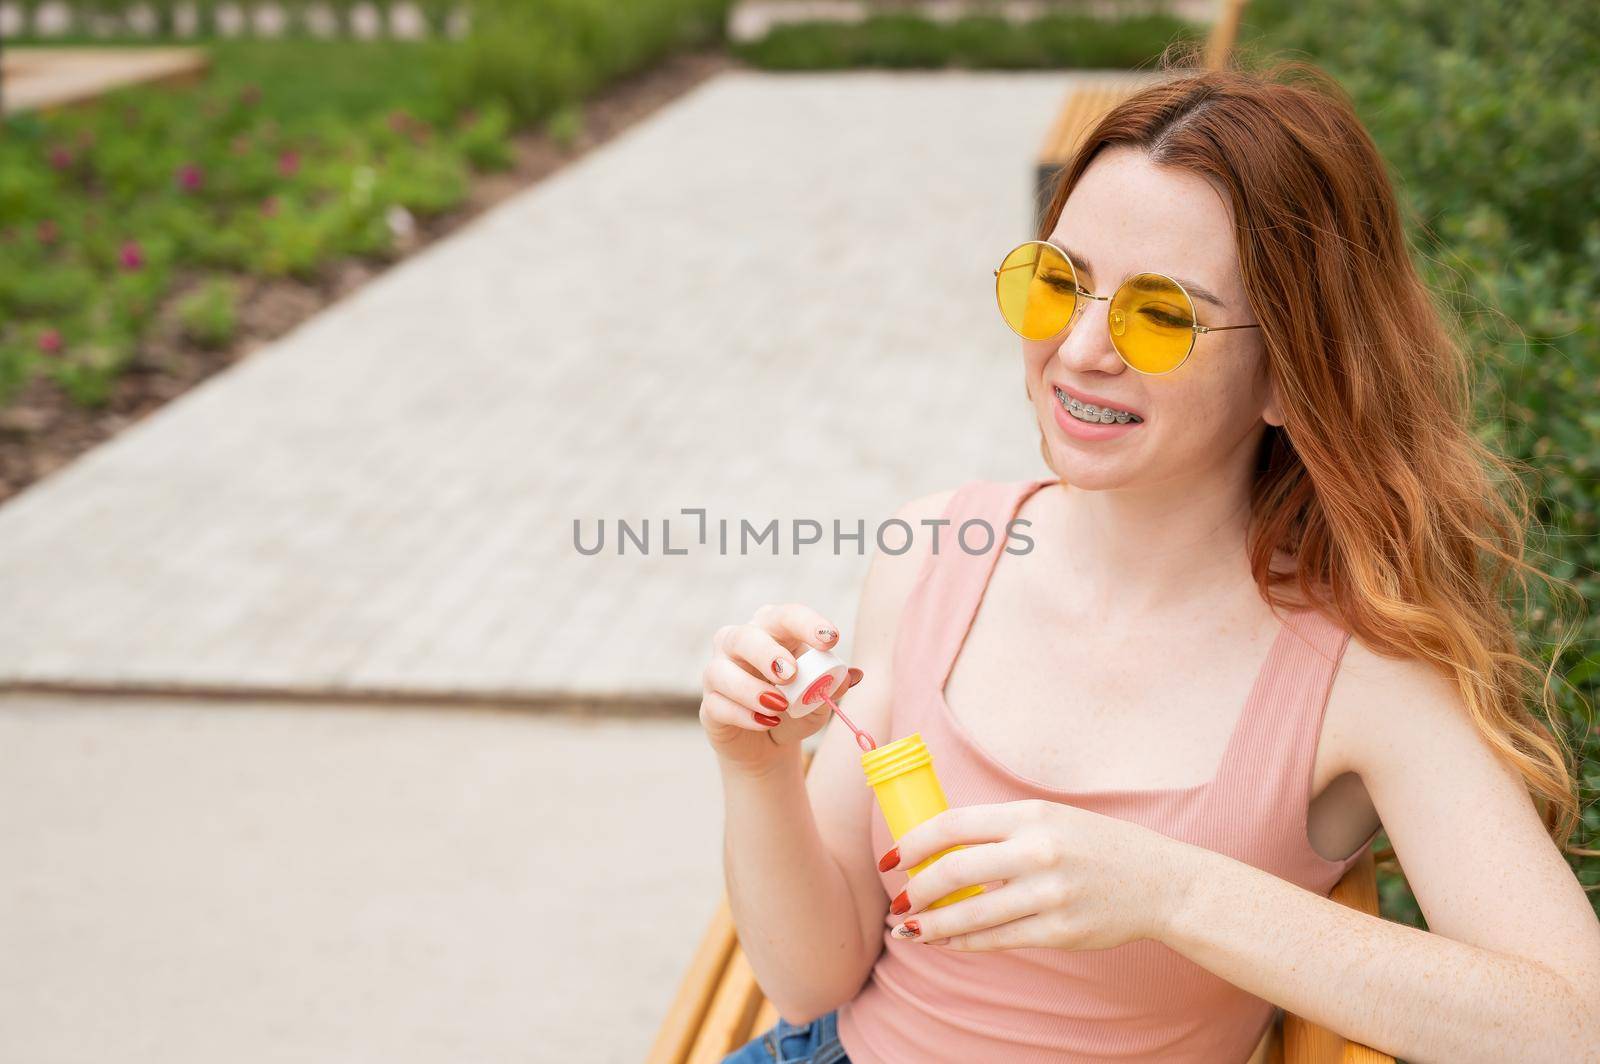 Young red-haired woman blowing soap bubbles outdoors. Girl in yellow sunglasses and braces